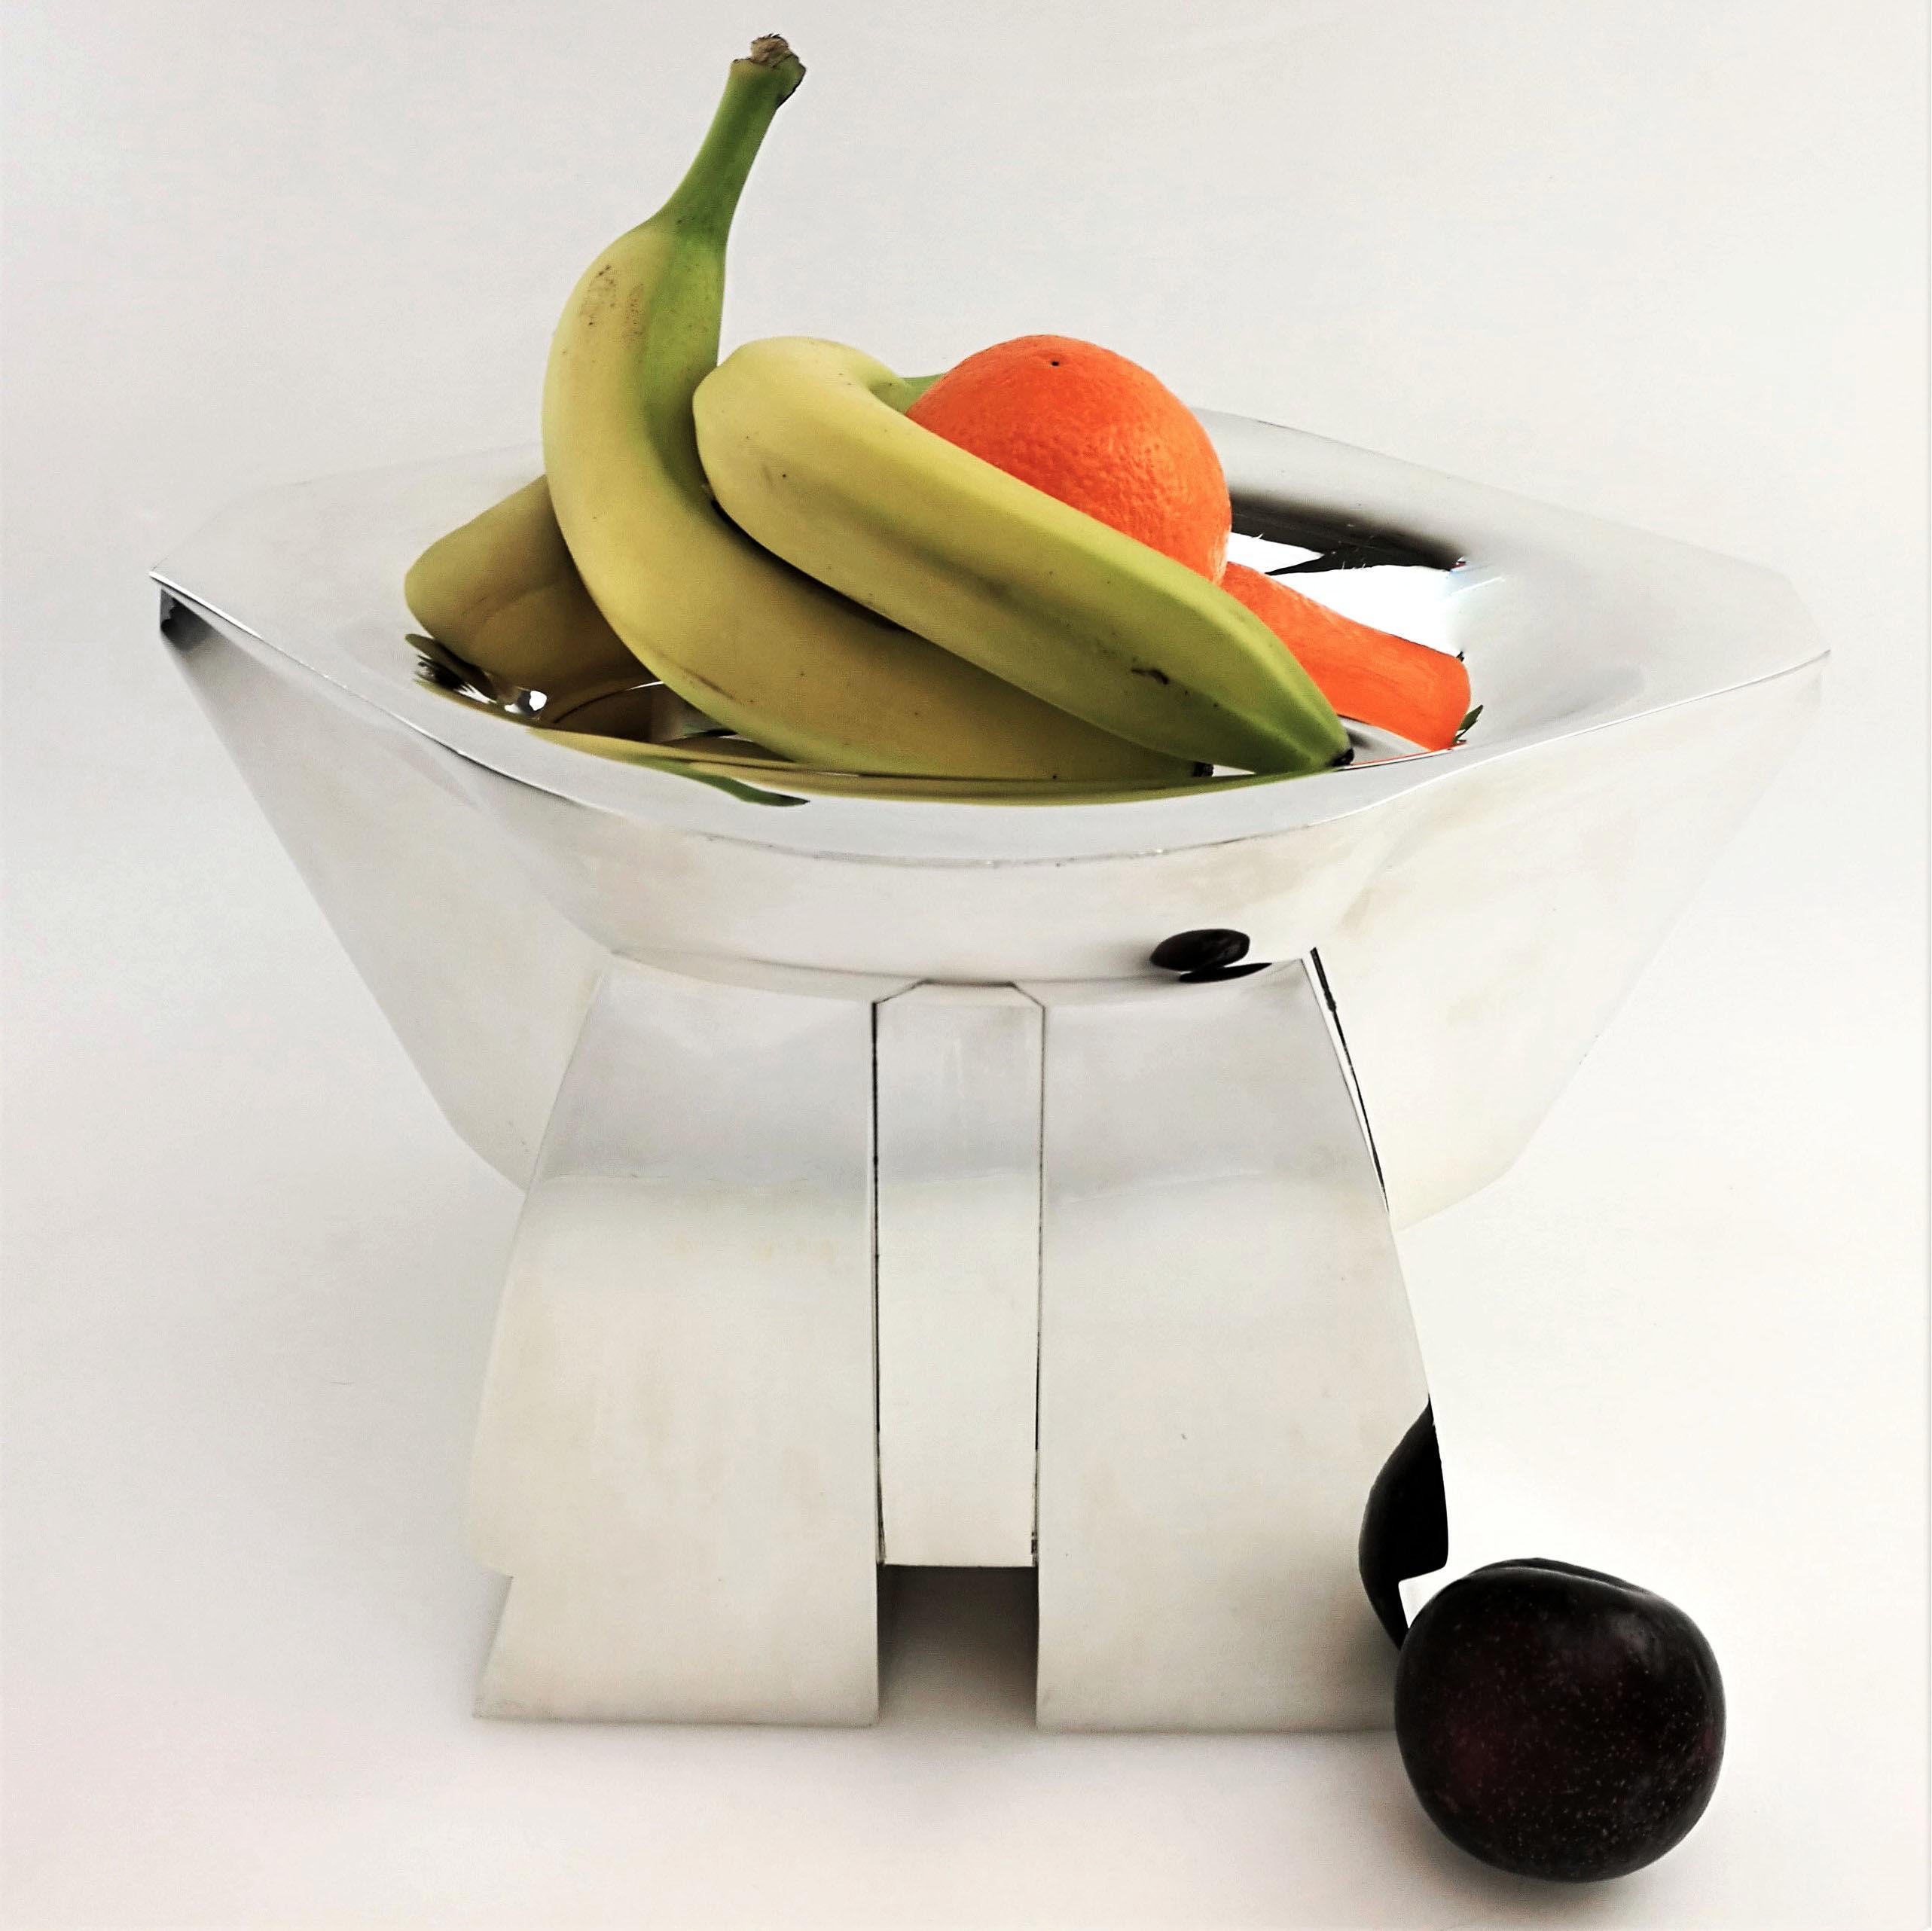 A gorgeous sterling Silver modernist Fruit Bowl / Centrepiece by the Spanish Silversmith Damian Garrido. As is typical of Garrido's Designs, this item created to be a functional Bowl, but is design with clean, lines and a modernist aesthetic, and